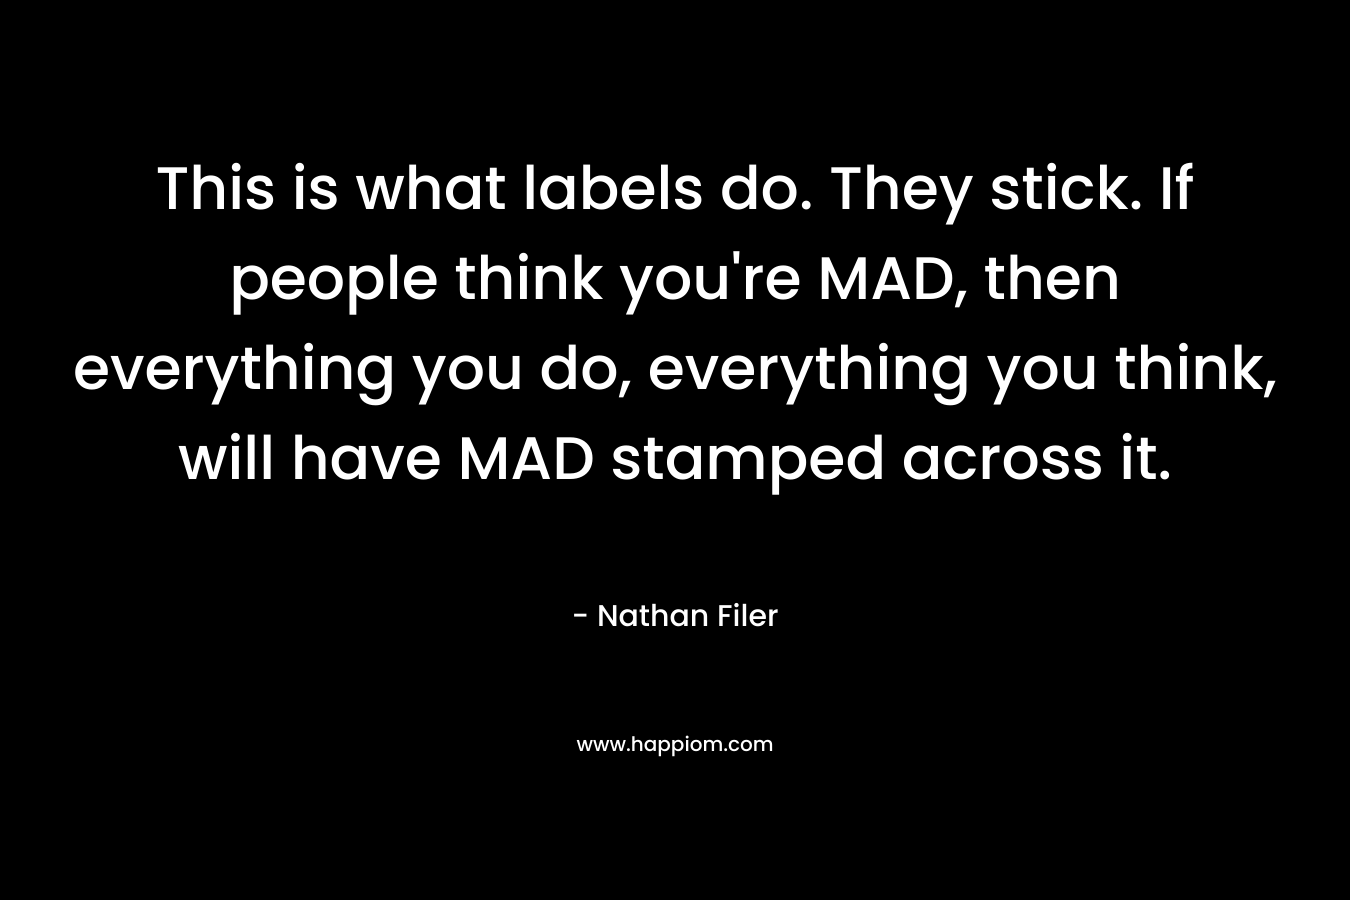 This is what labels do. They stick. If people think you’re MAD, then everything you do, everything you think, will have MAD stamped across it. – Nathan Filer